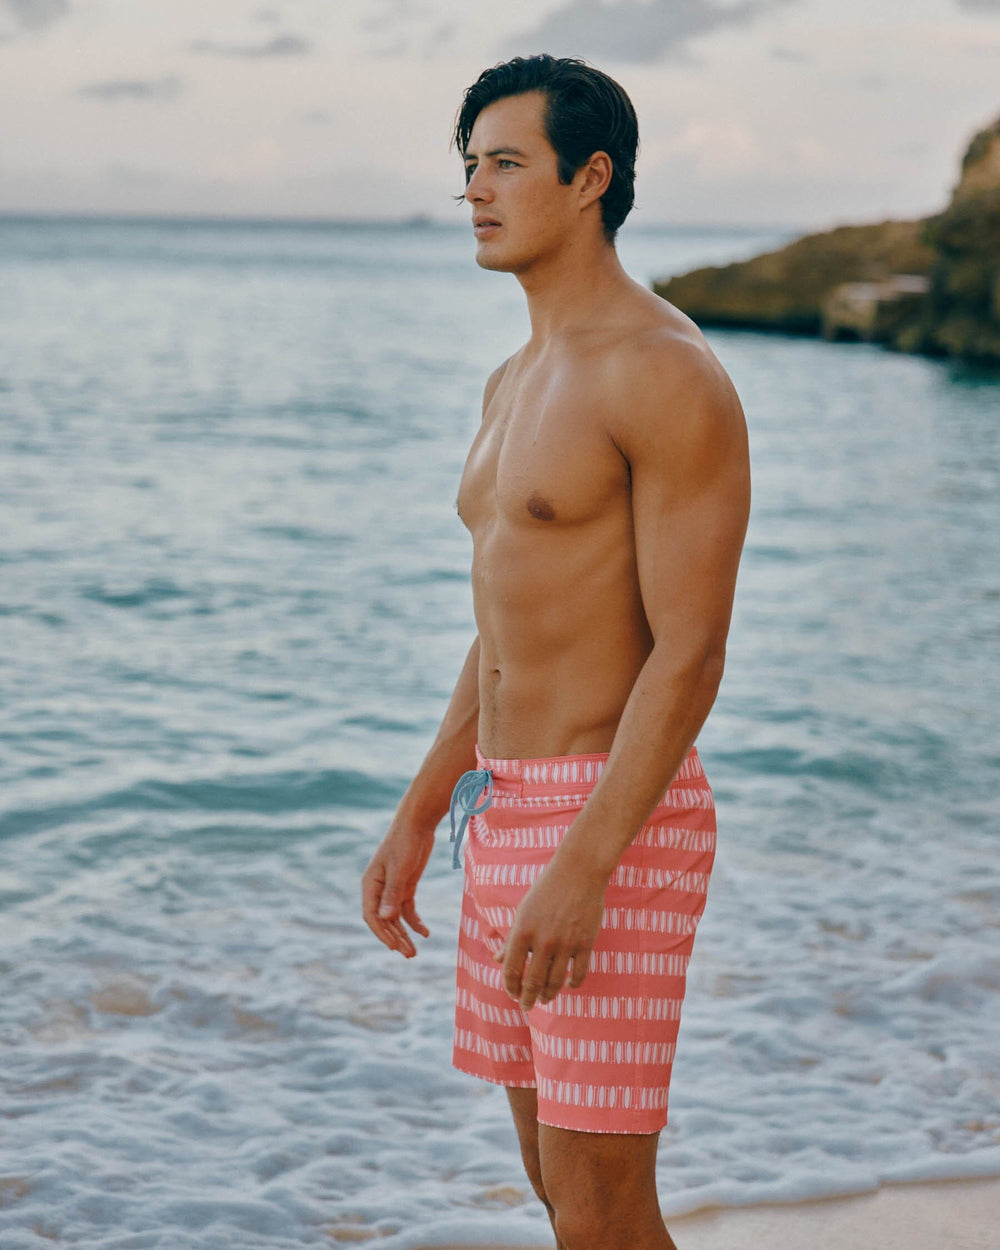 The lifestyle view of the Southern Tide Paddlin Out Printed Swim Short by Southern Tide - Sunkist Coral